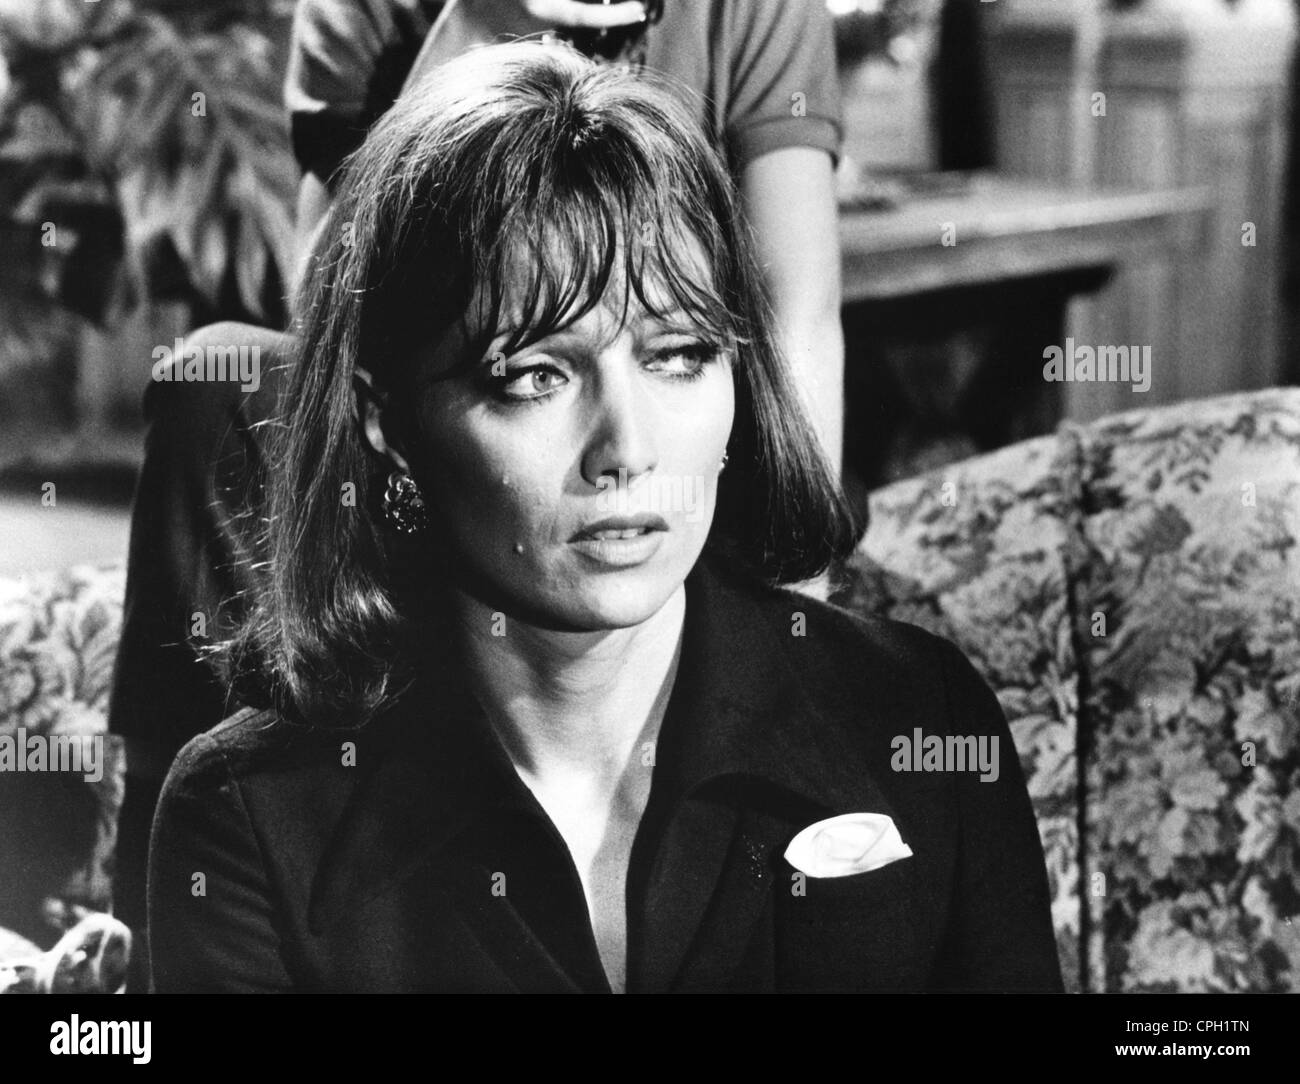 movie, 'The Unfaithful Wife' ('La femme infidele'), FRA 1969, director: Claude Chabrol, scene with Stephane Audran, Third-Party-Permissions-Neccessary Stock Photo